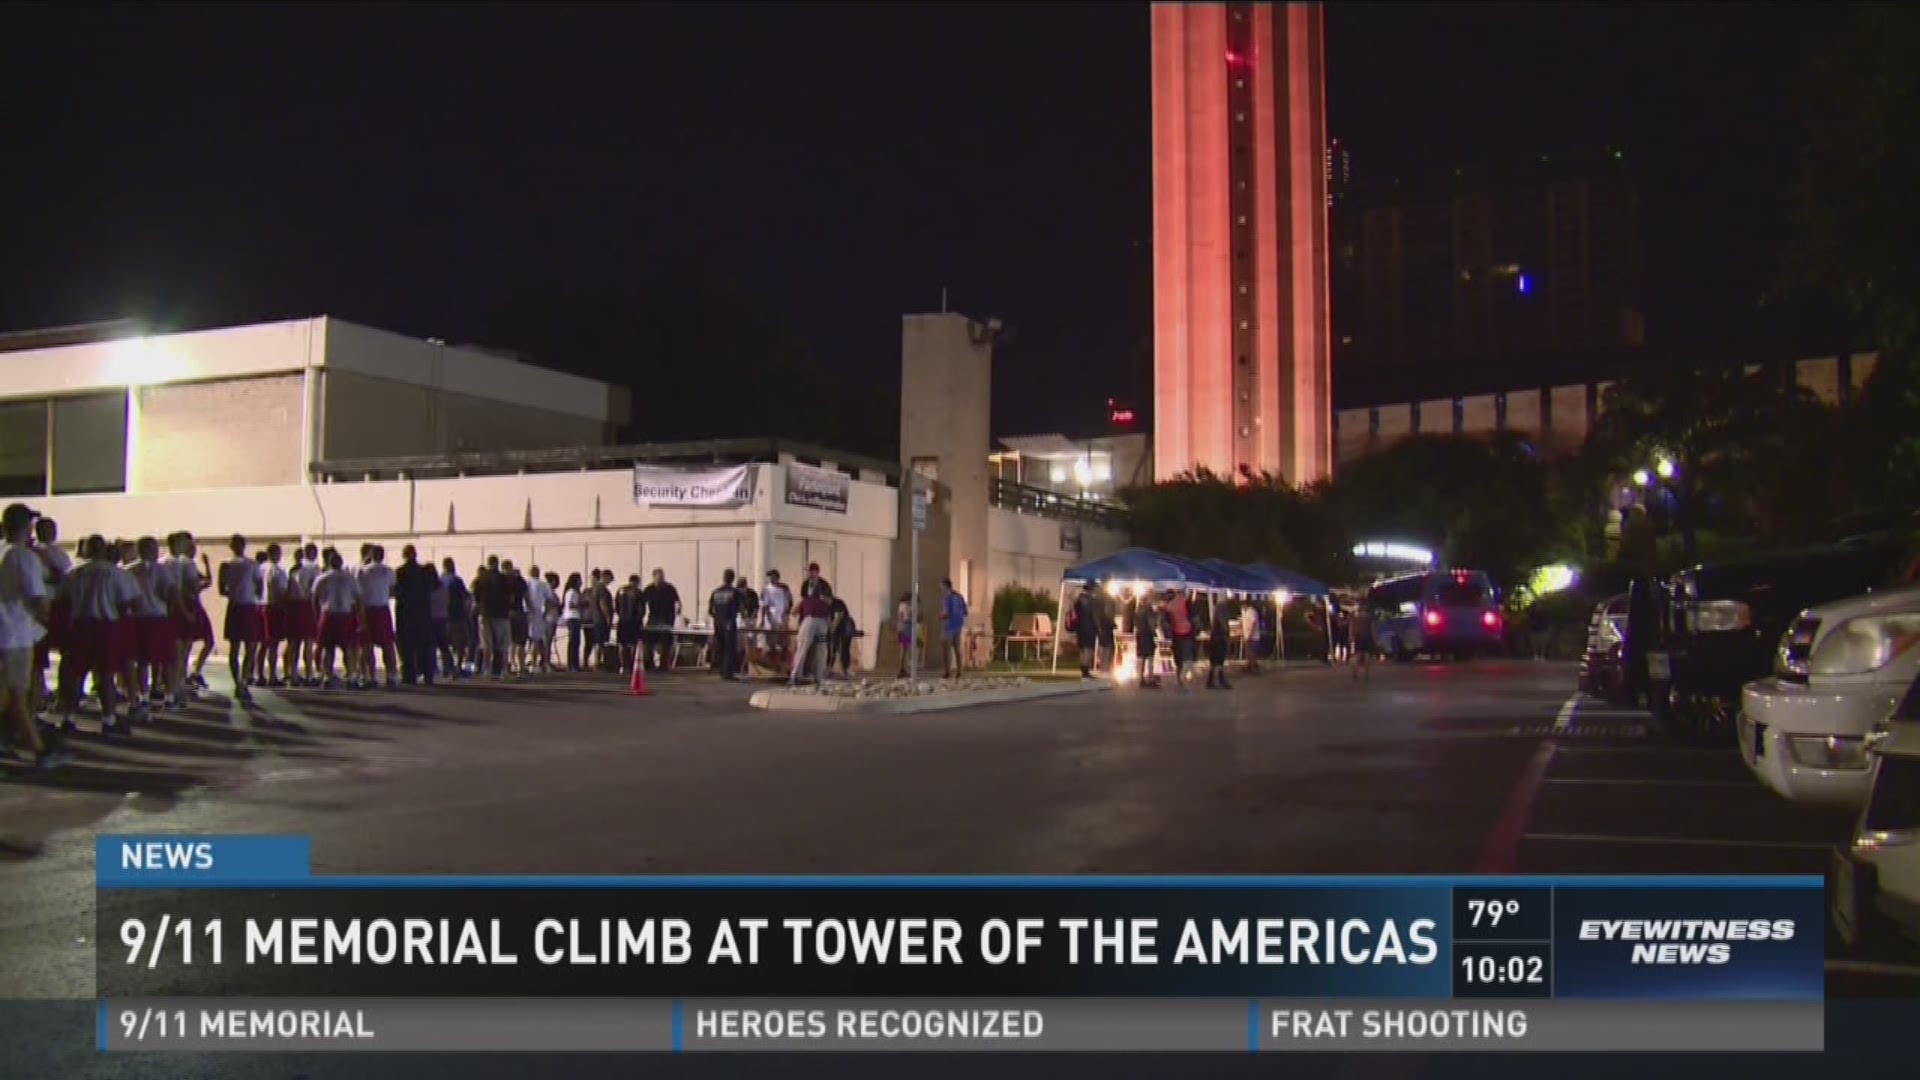 9/11 memorial climb at Tower of the Americas